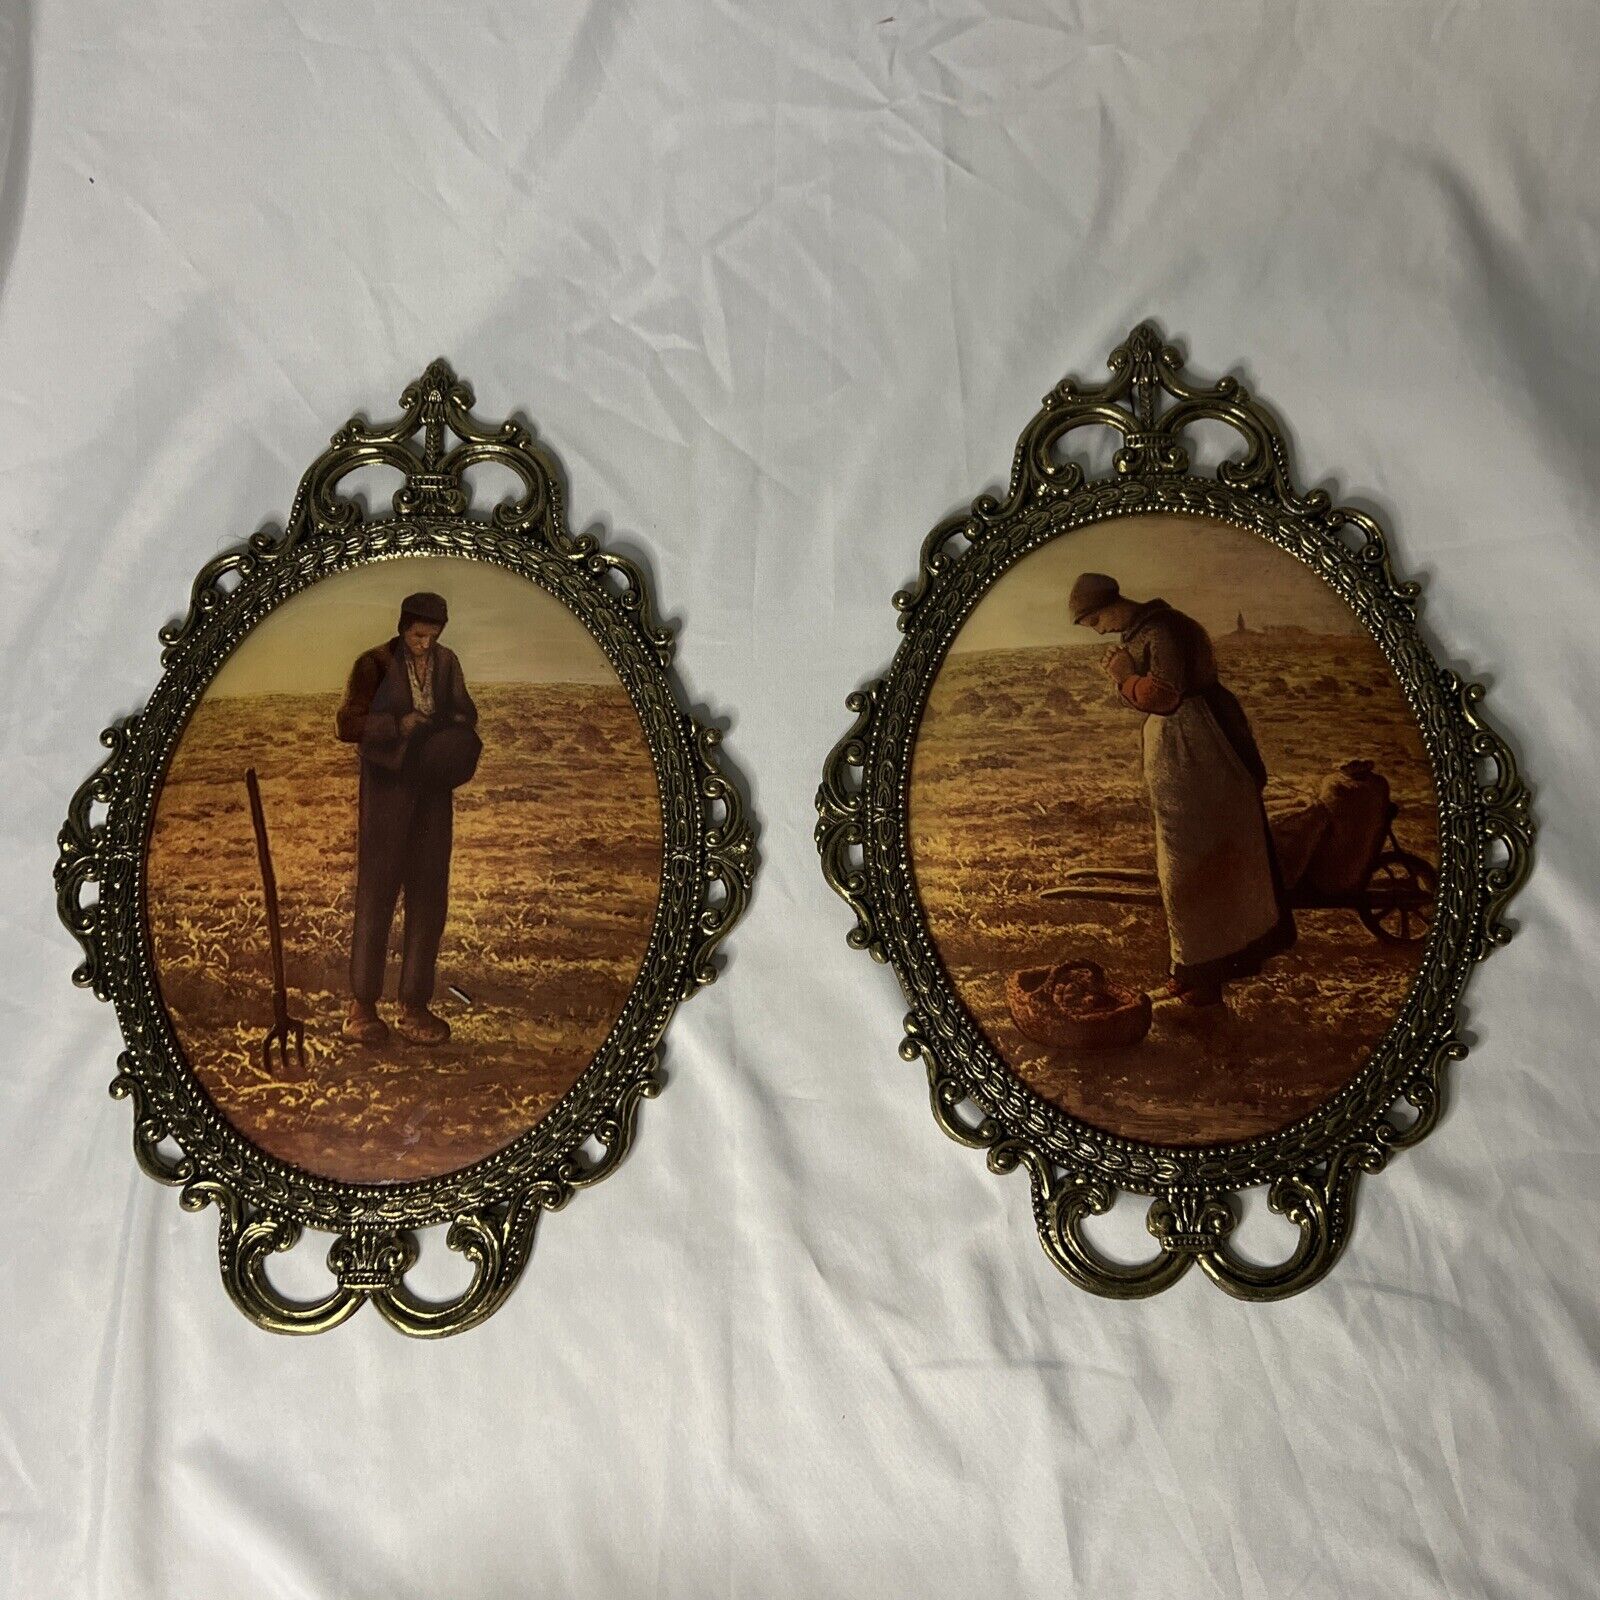 2 Vintage Convex Oval Pictures The Angelus Jean-Francois Millet Farmer & Wife